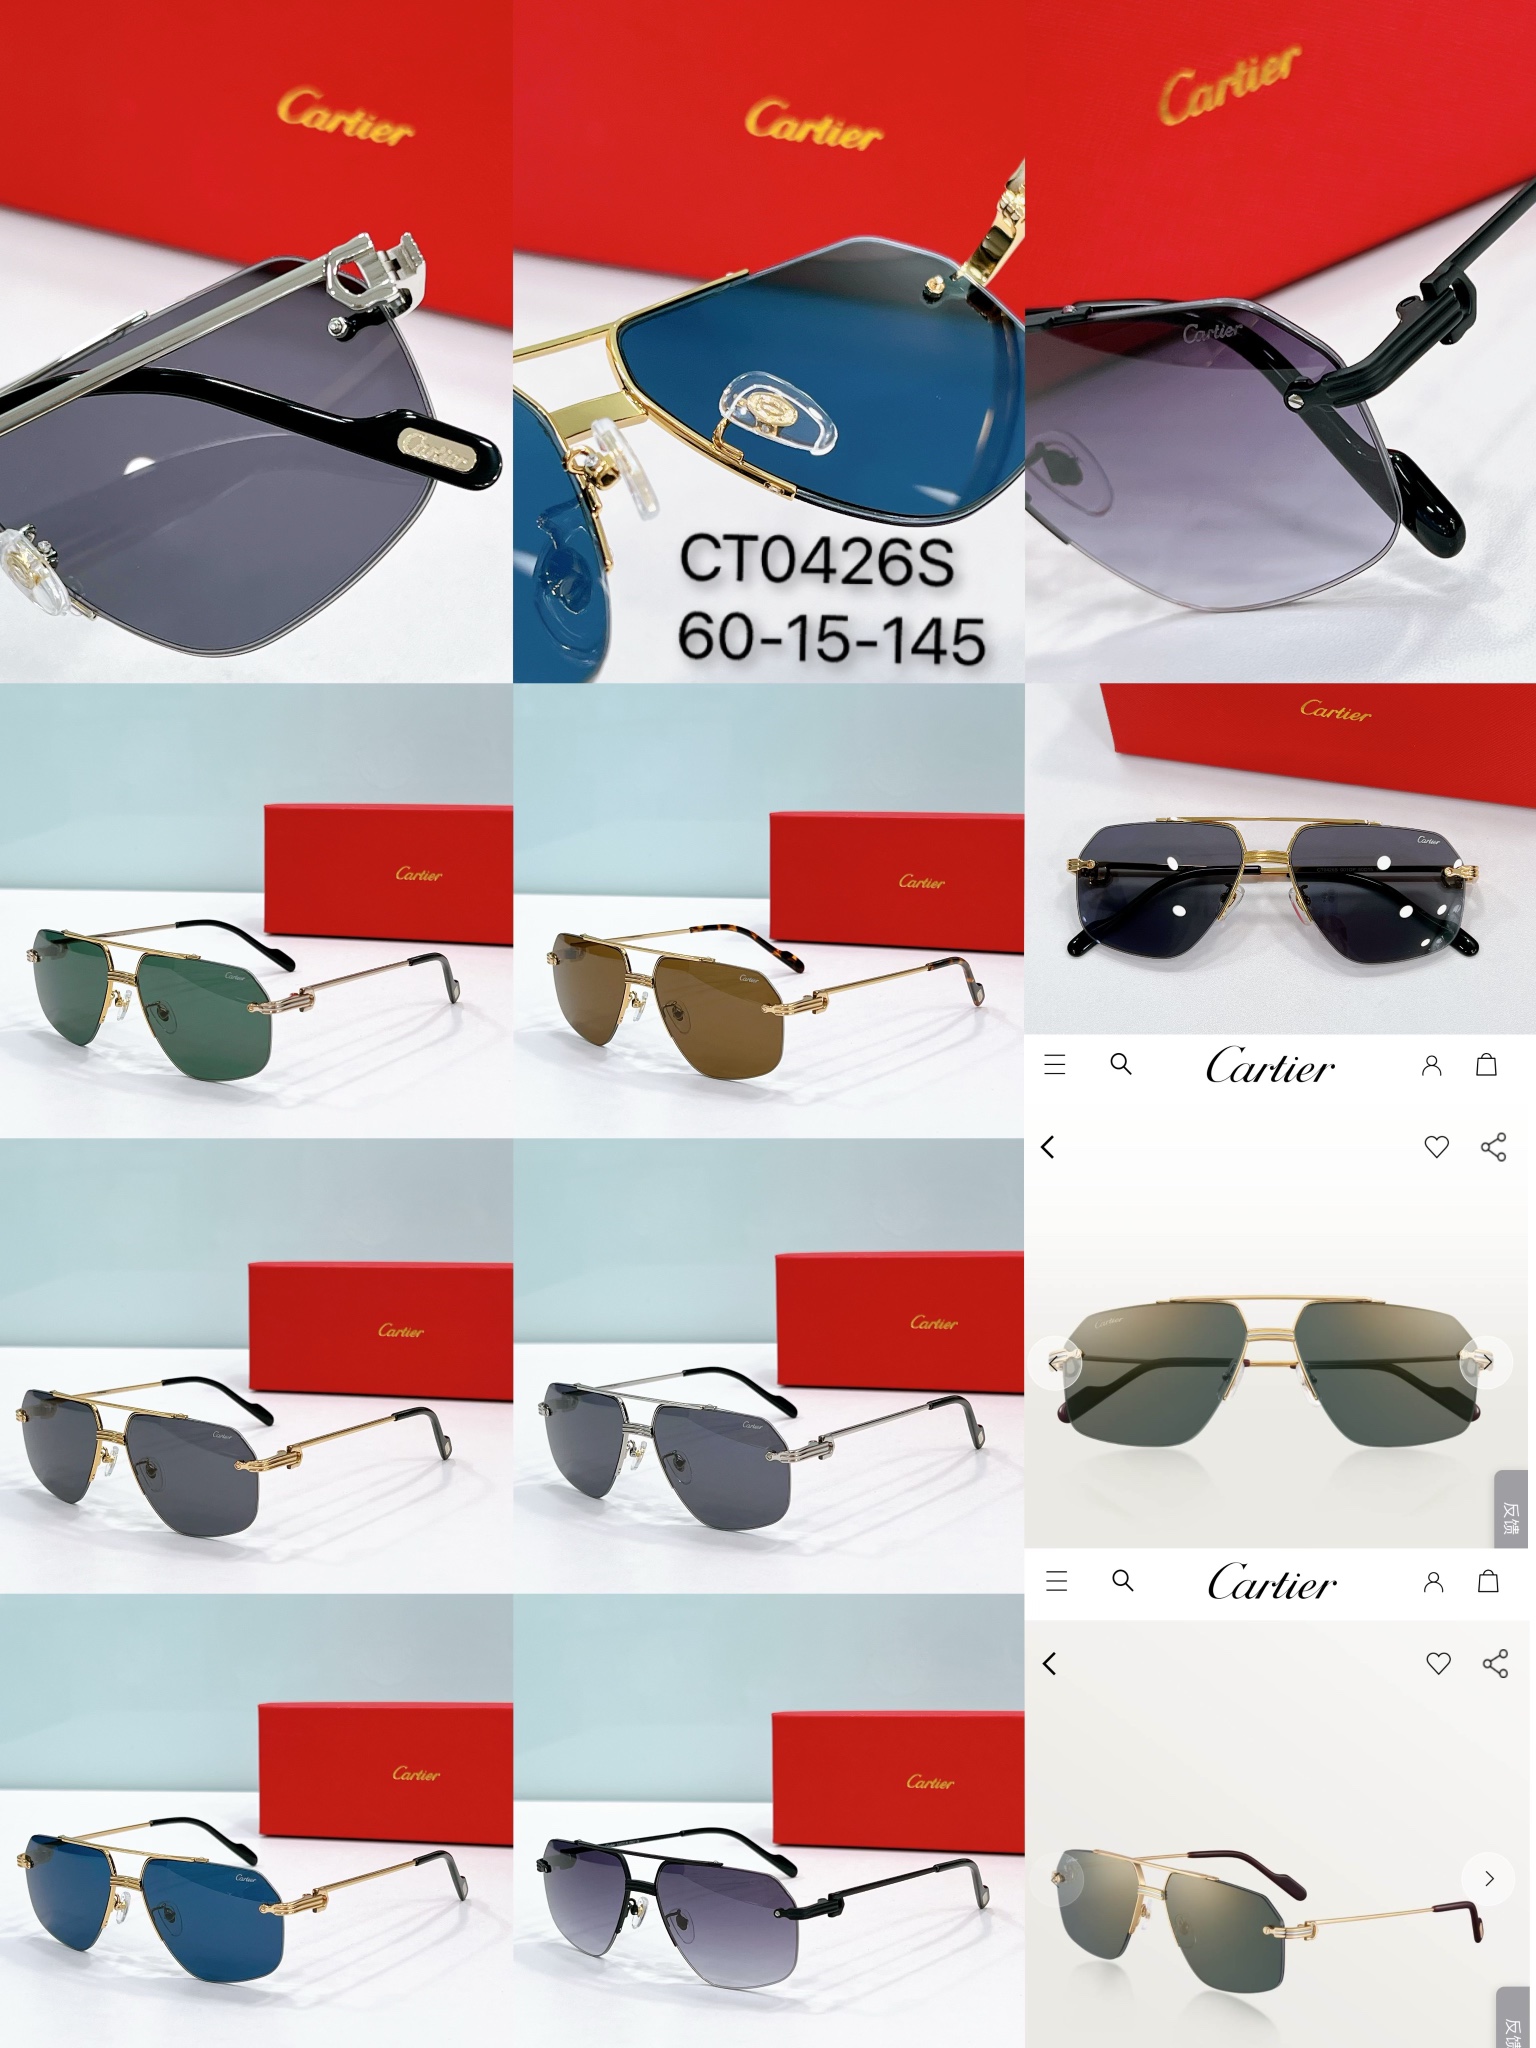 mirror copy luxury
 Cartier Sunglasses Only sell high-quality